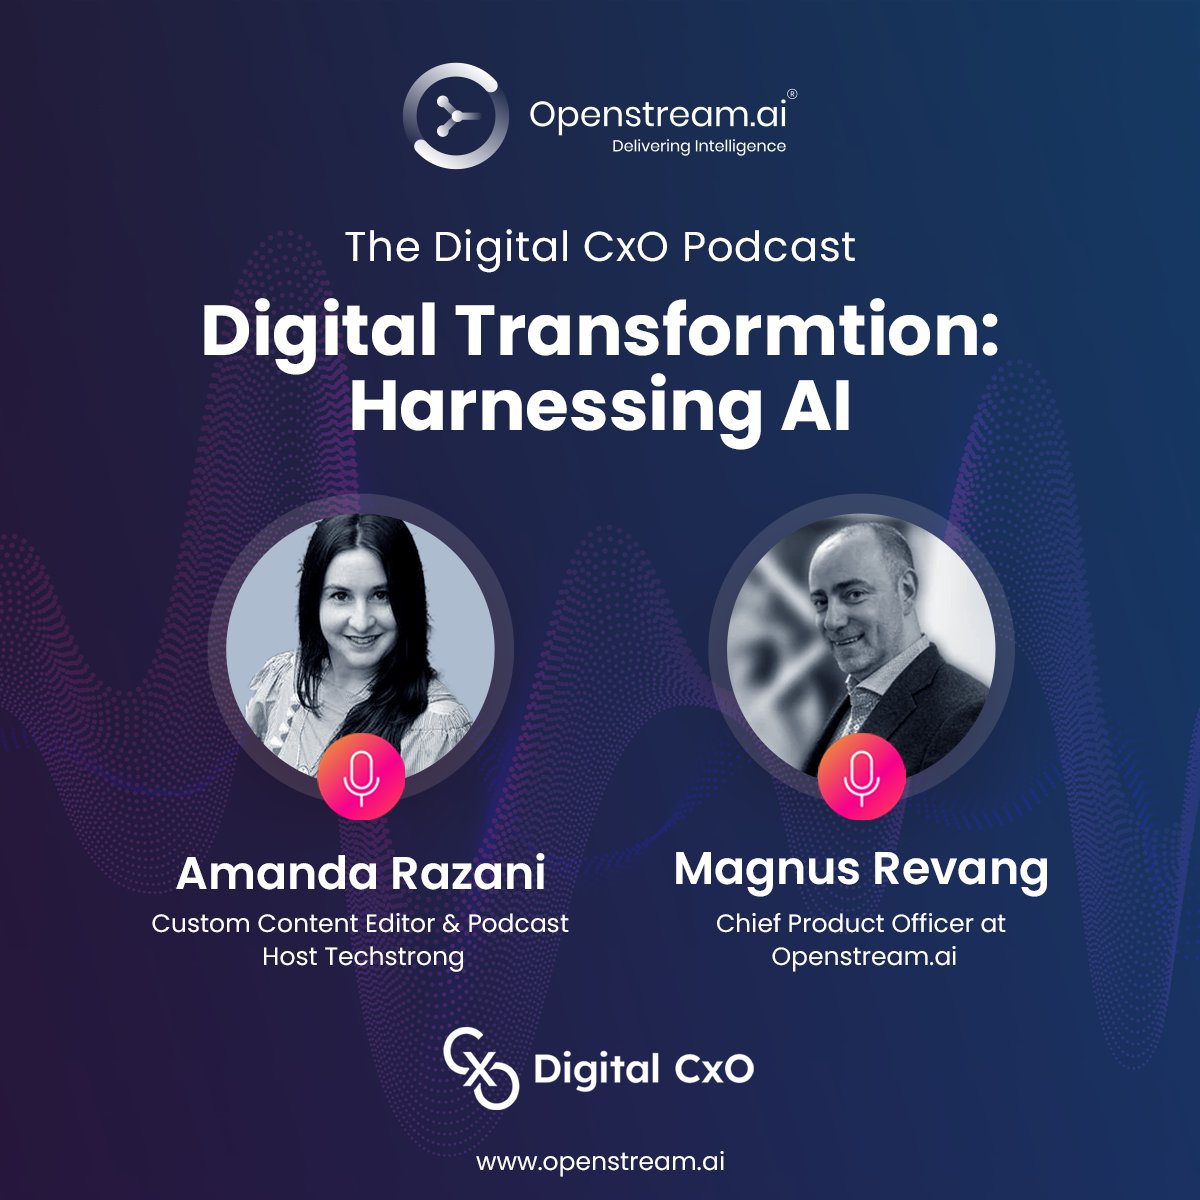 Magnus Revang discusses Digital Transformation and Harnessing AI on the Digital CxO 's Podcast with Amanda Razani. They discuss #conversationalai , #generativeai, #instructionalai and more. Listen today:
hubs.li/Q024tpPK0